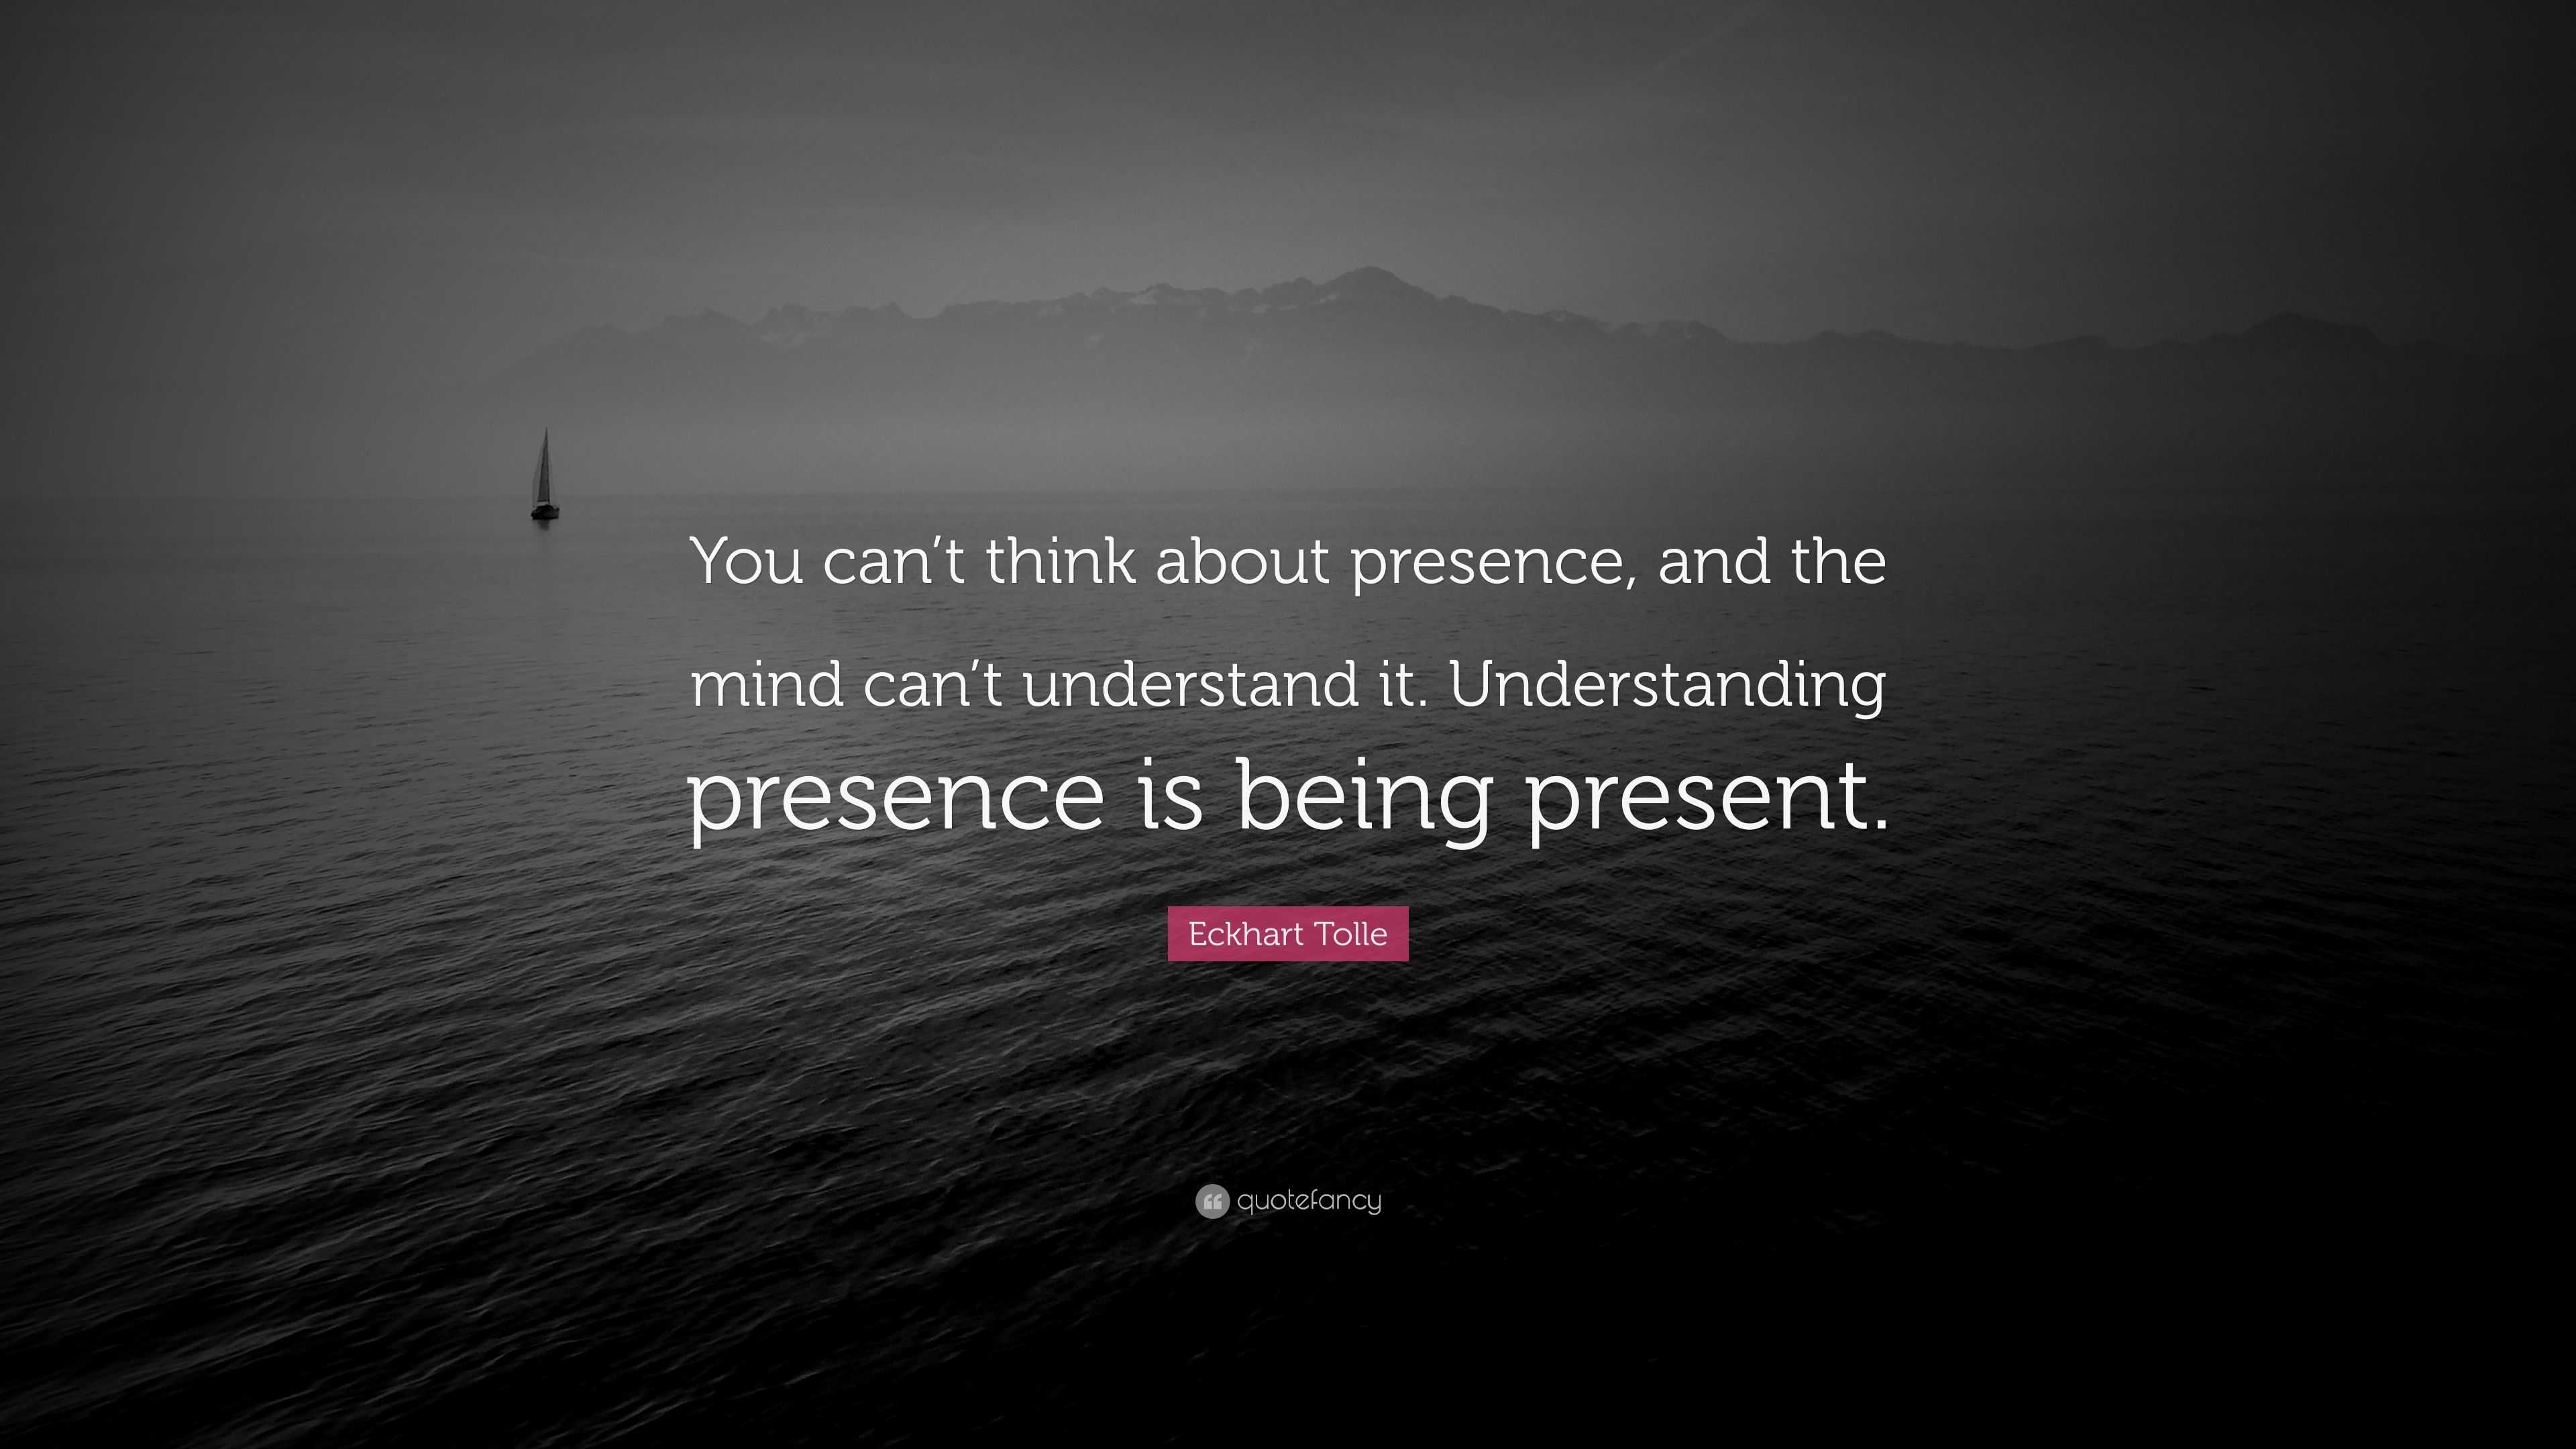 Eckhart Tolle Quote “You can’t think about presence, and the mind can